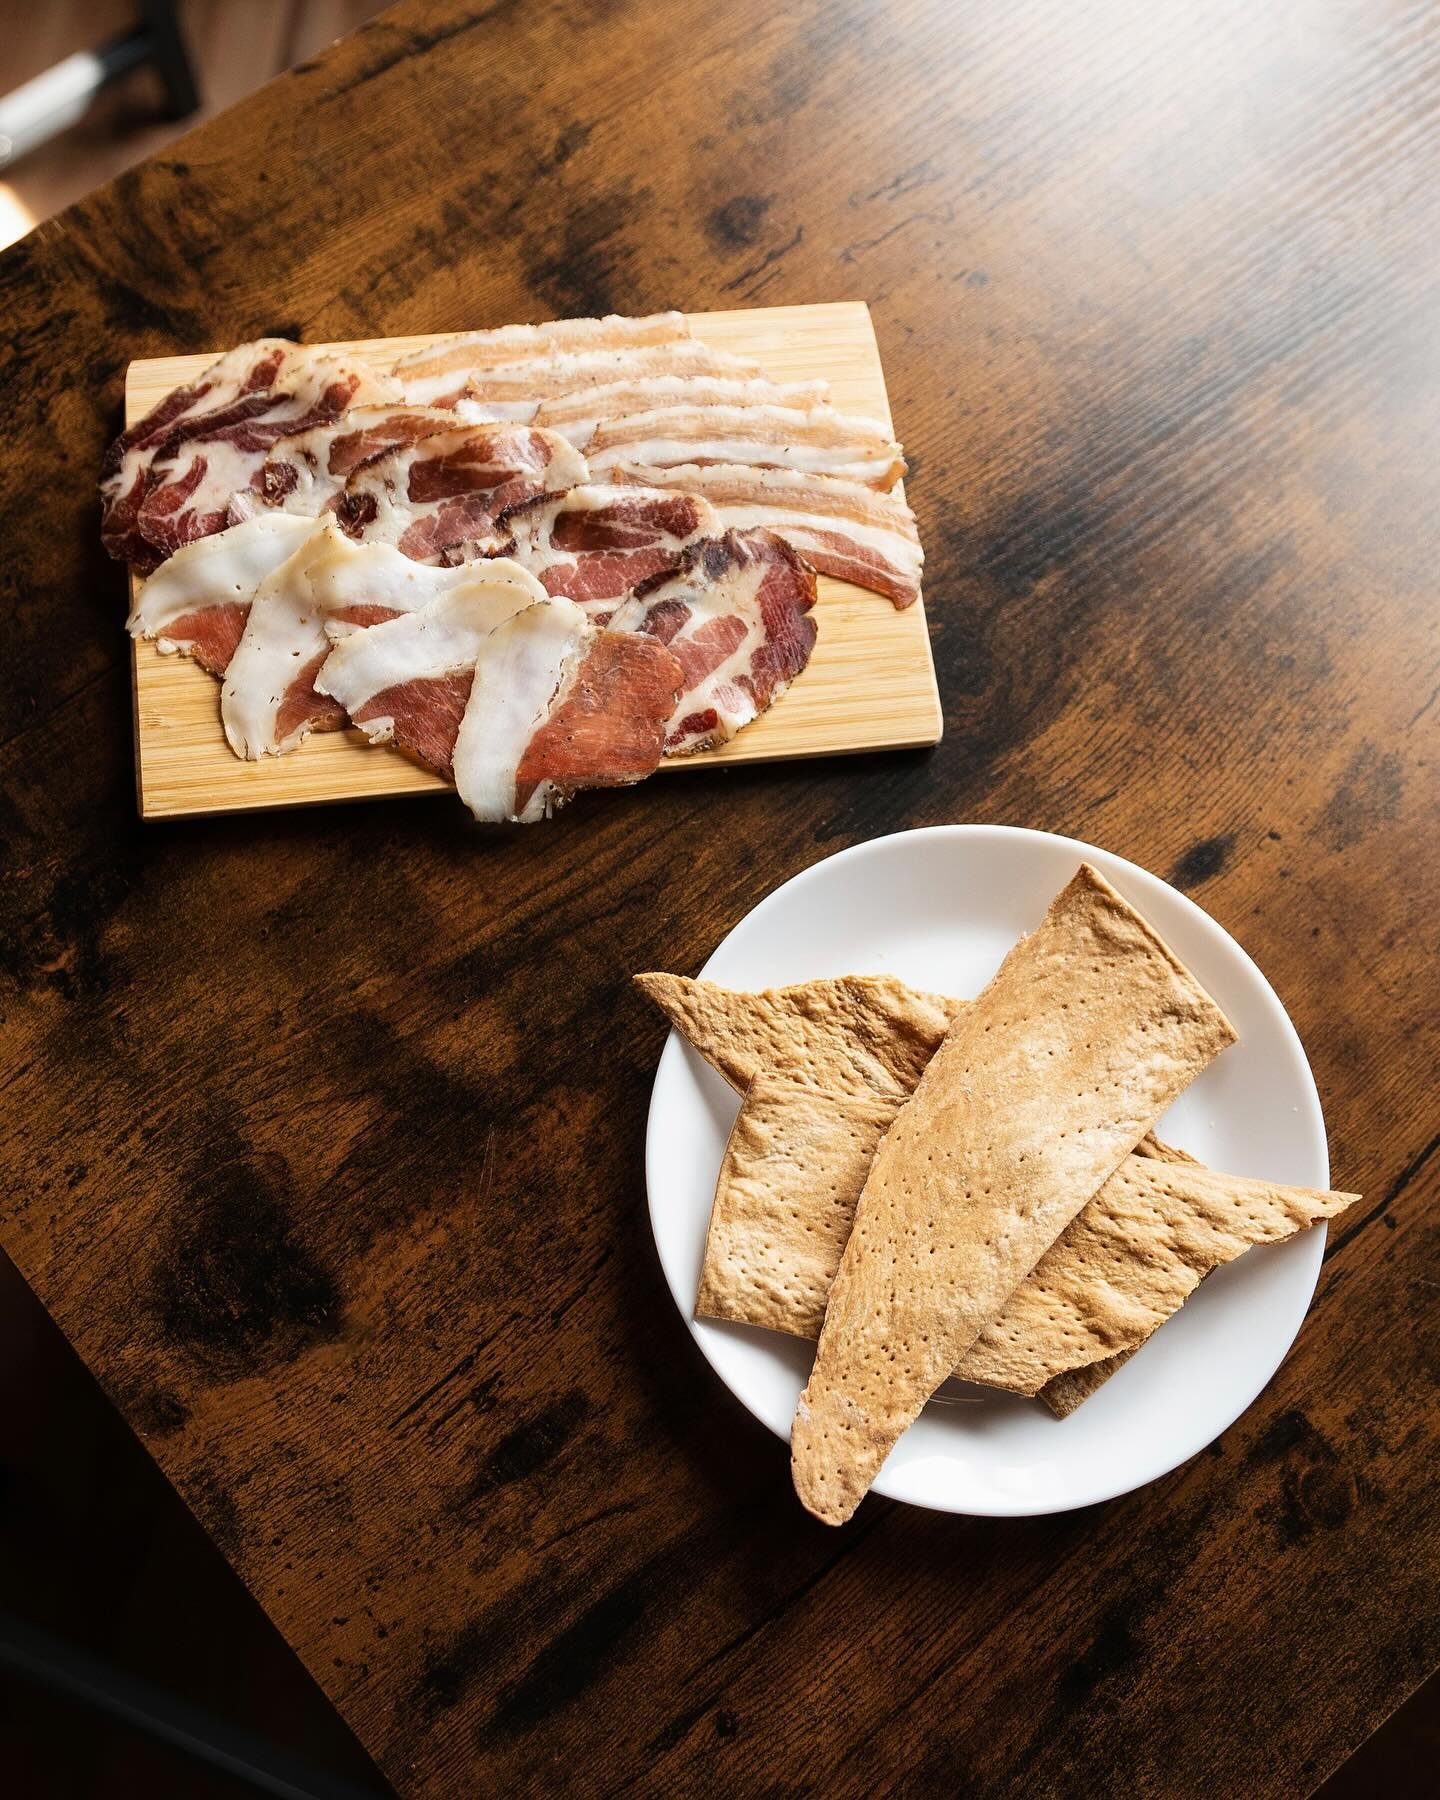 Adulthood: where lunchables are now called charcuterie 🍴

Come enjoy our @farmspiritstl Charcuterie, which features a rotating selection of expertly cured meats, rich p&acirc;t&eacute;s (may contain tree nuts), and perfectly crisp crackers. 

We&rsq